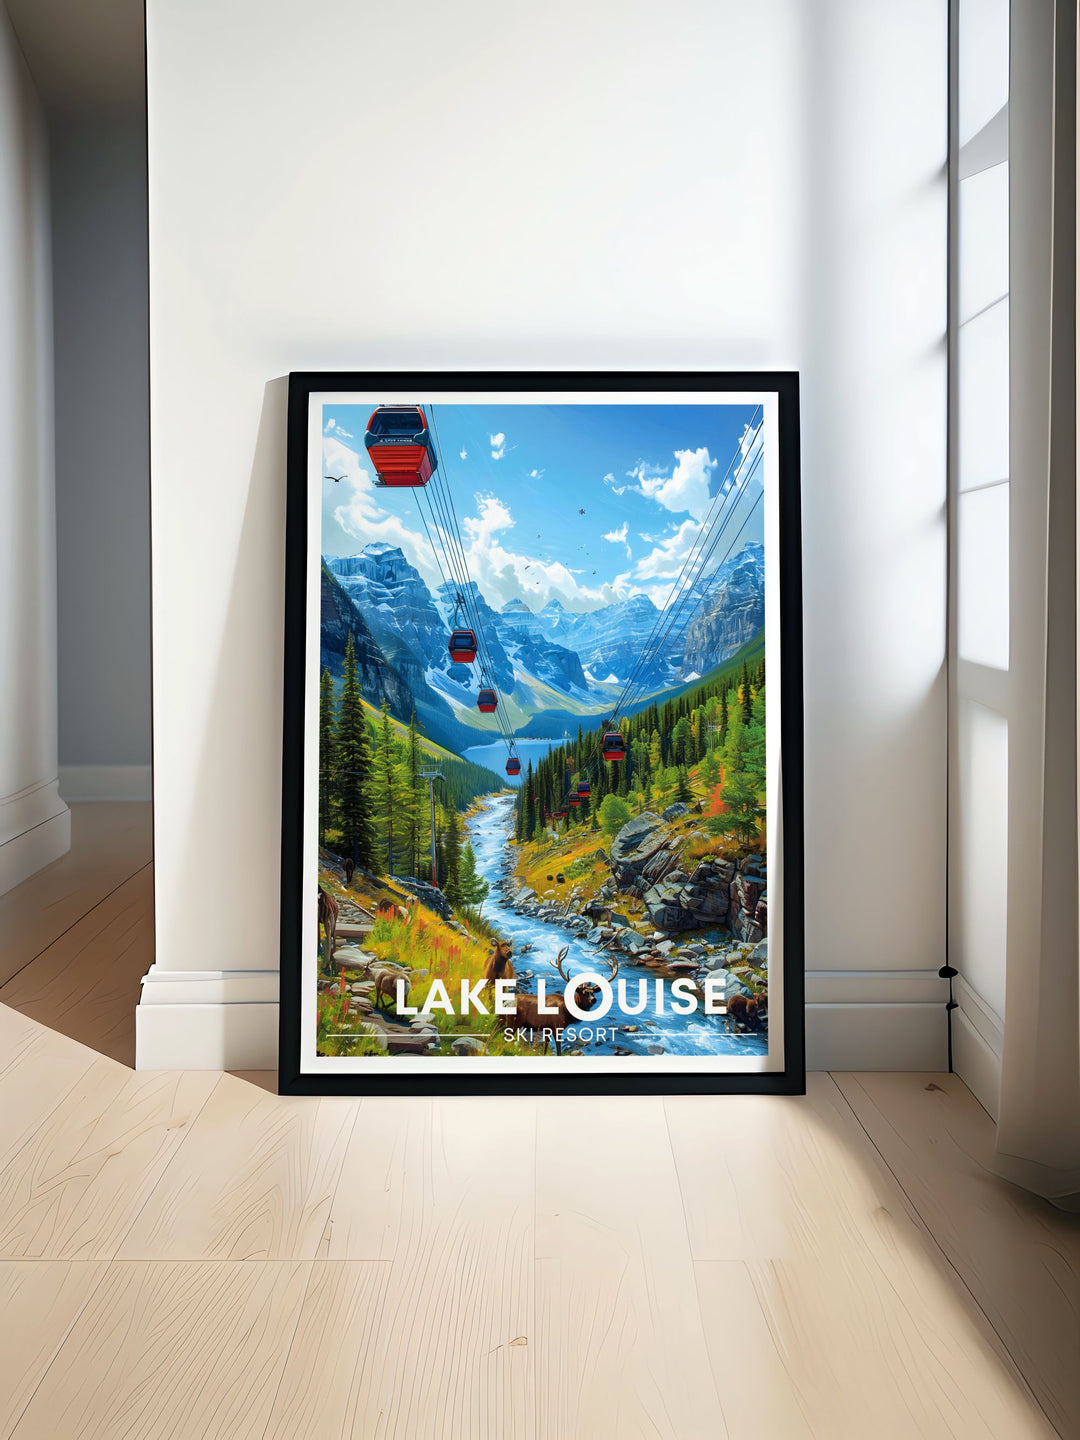 The natural splendor of Lake Louise is highlighted in this illustration, with its tranquil turquoise waters and dramatic mountain backdrop, ideal for your home decor.